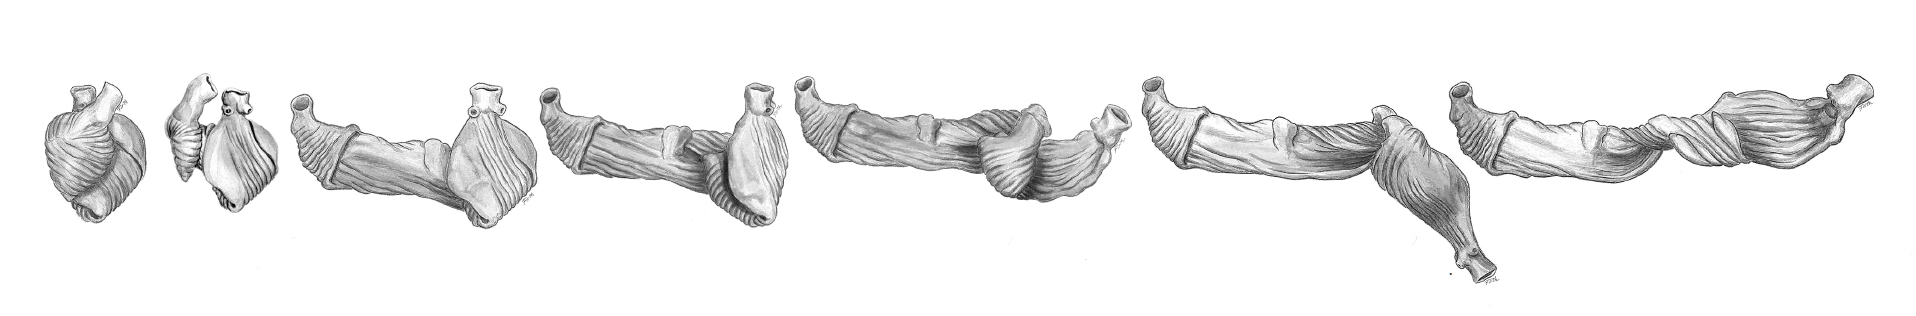 The Helical Heart by Francisco Torrent Guasp. One single muscle folded in helical structure.